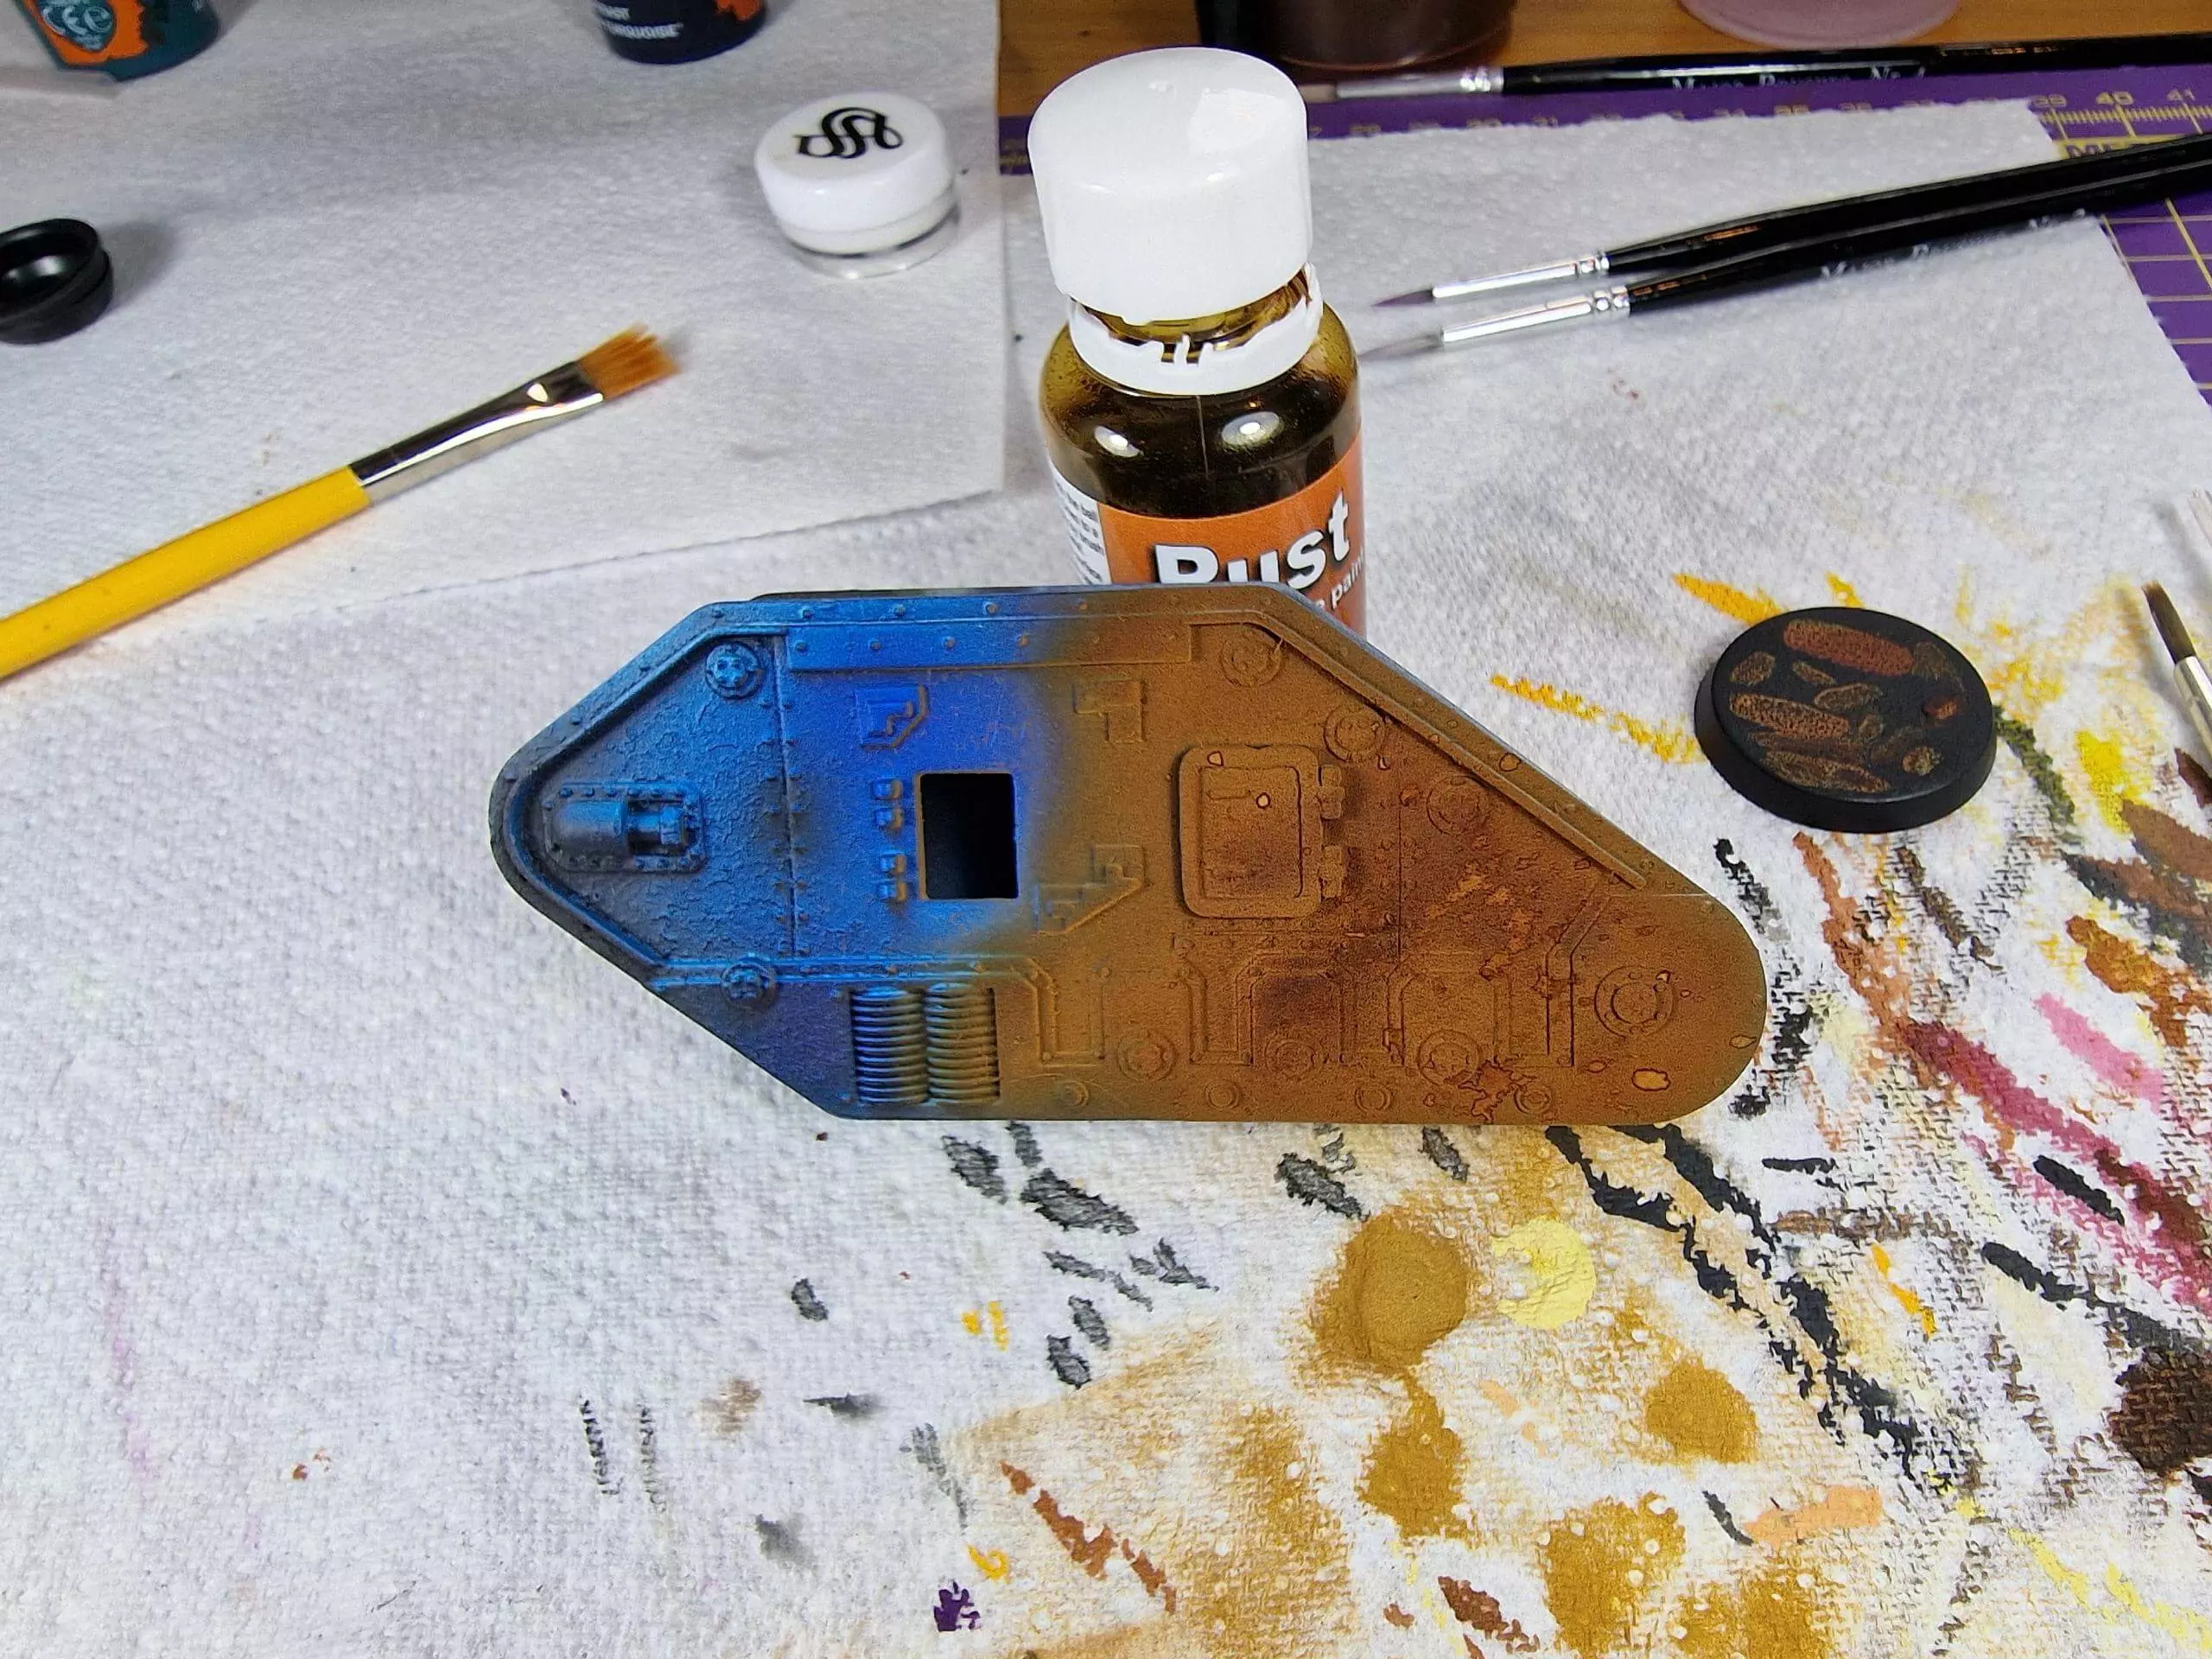 Airbrush Paint - Choose the right paint for your airbrush